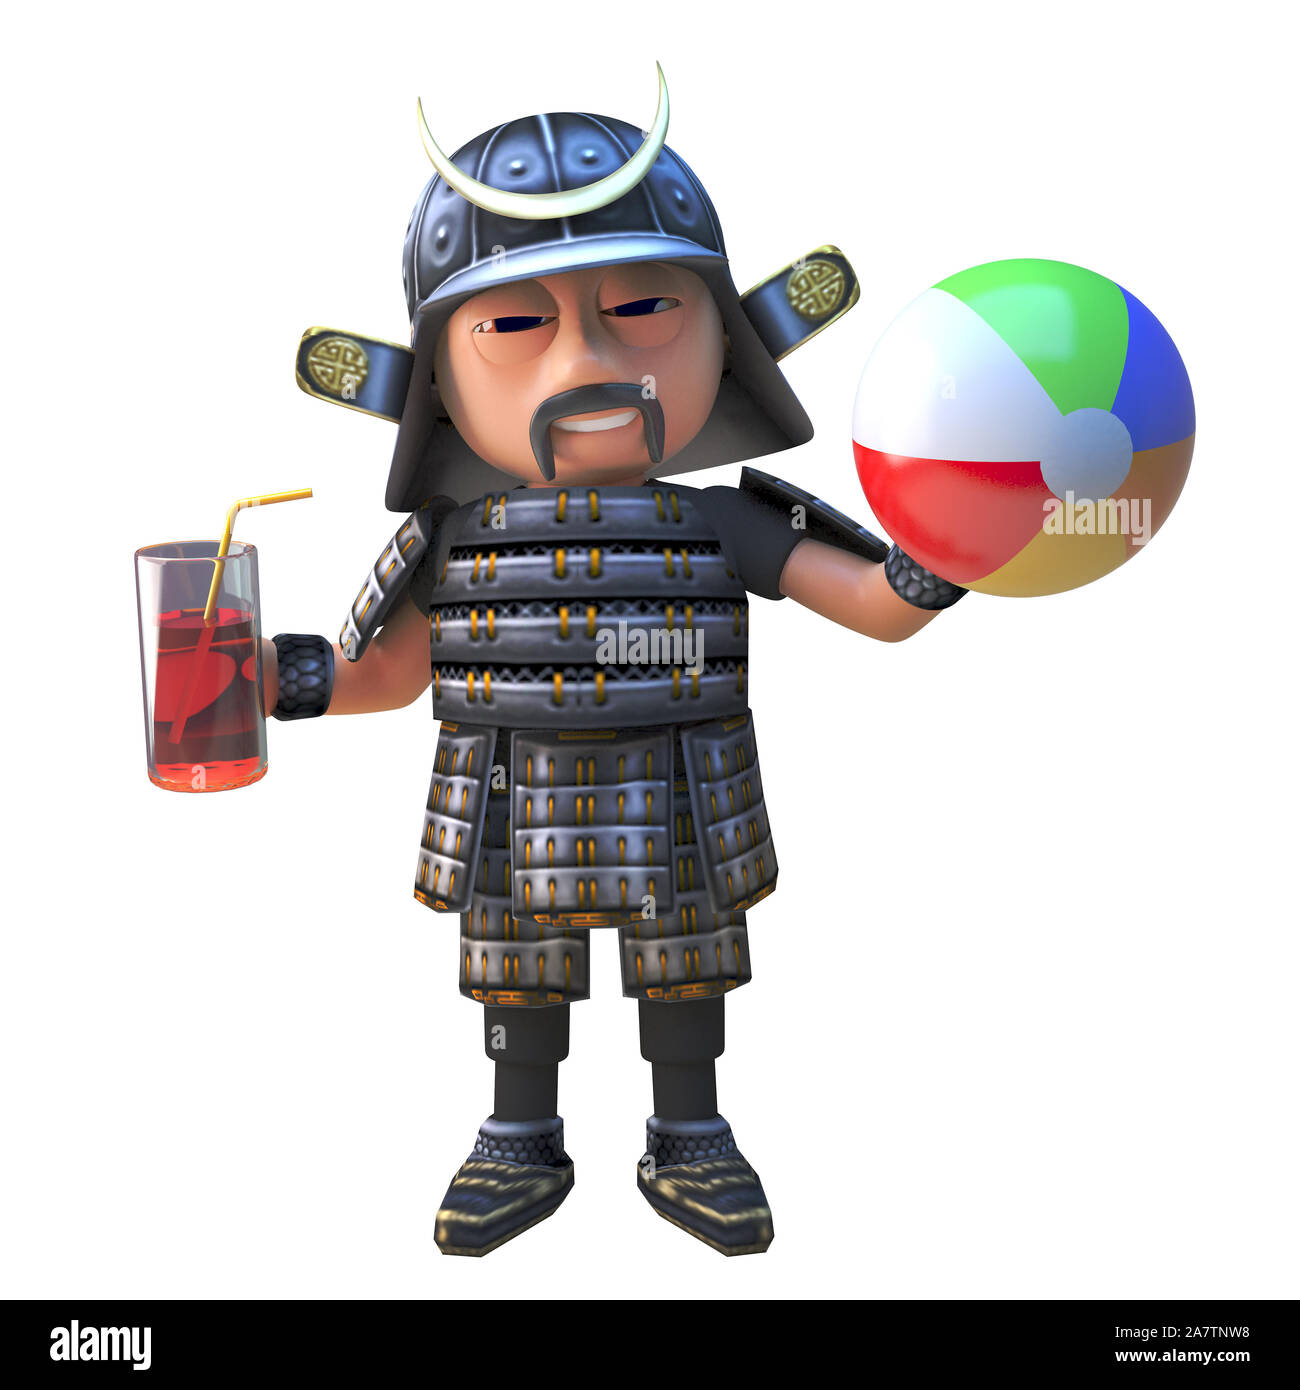 Cartoon 3d samurau warrion character in armour drinking and holding a beach ball, 3d illustration render Stock Photo